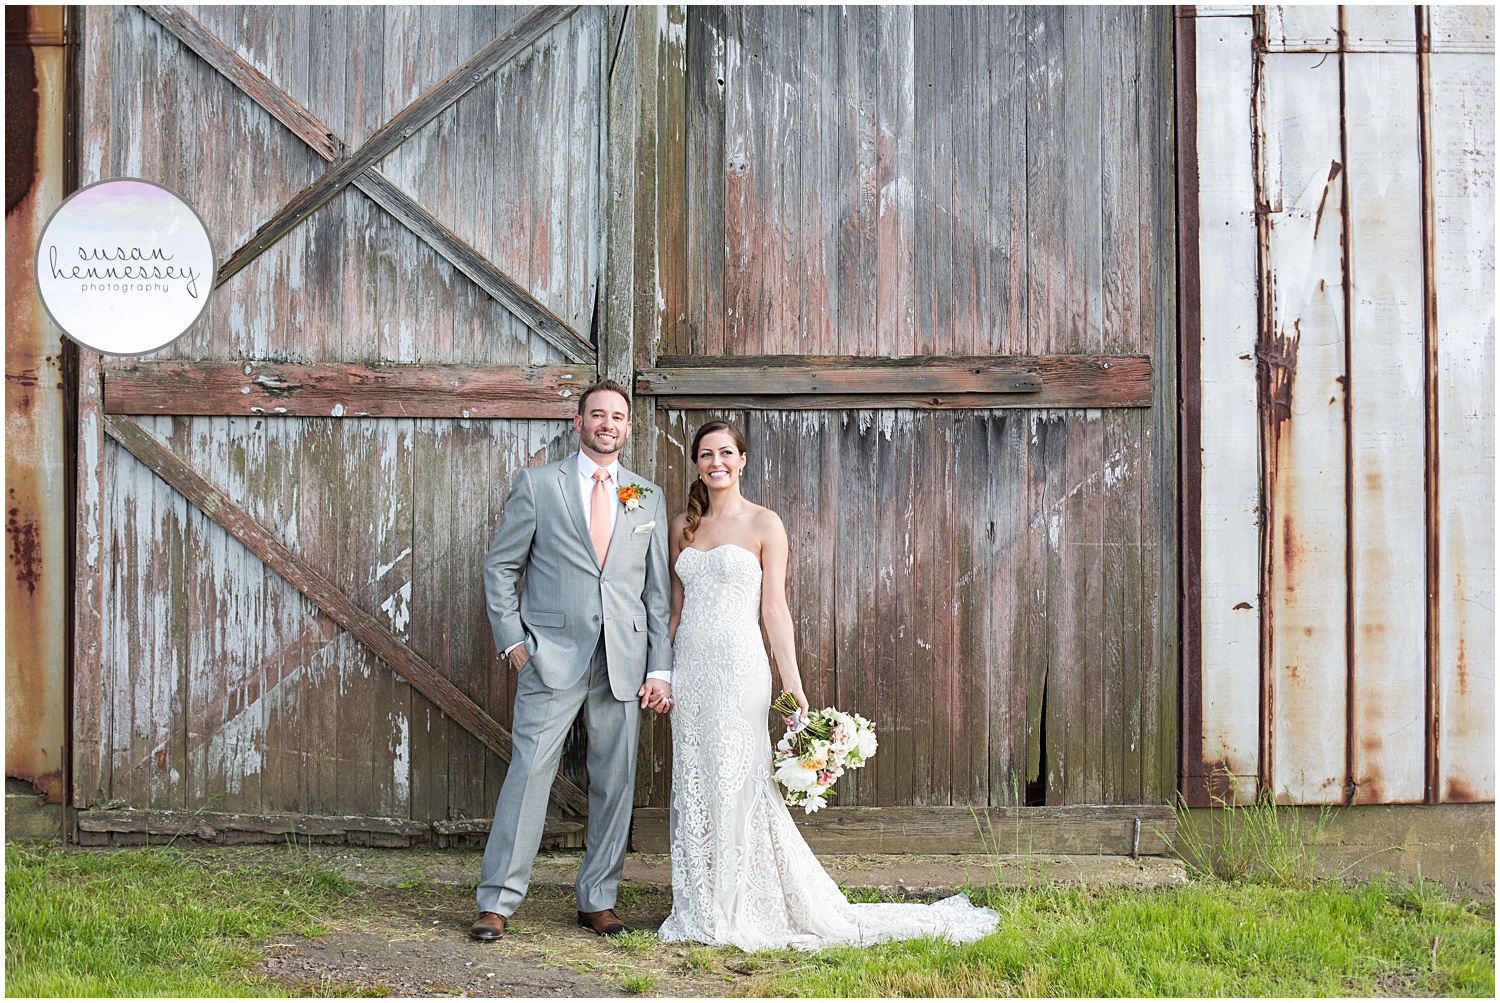 Couple posing in front of barn